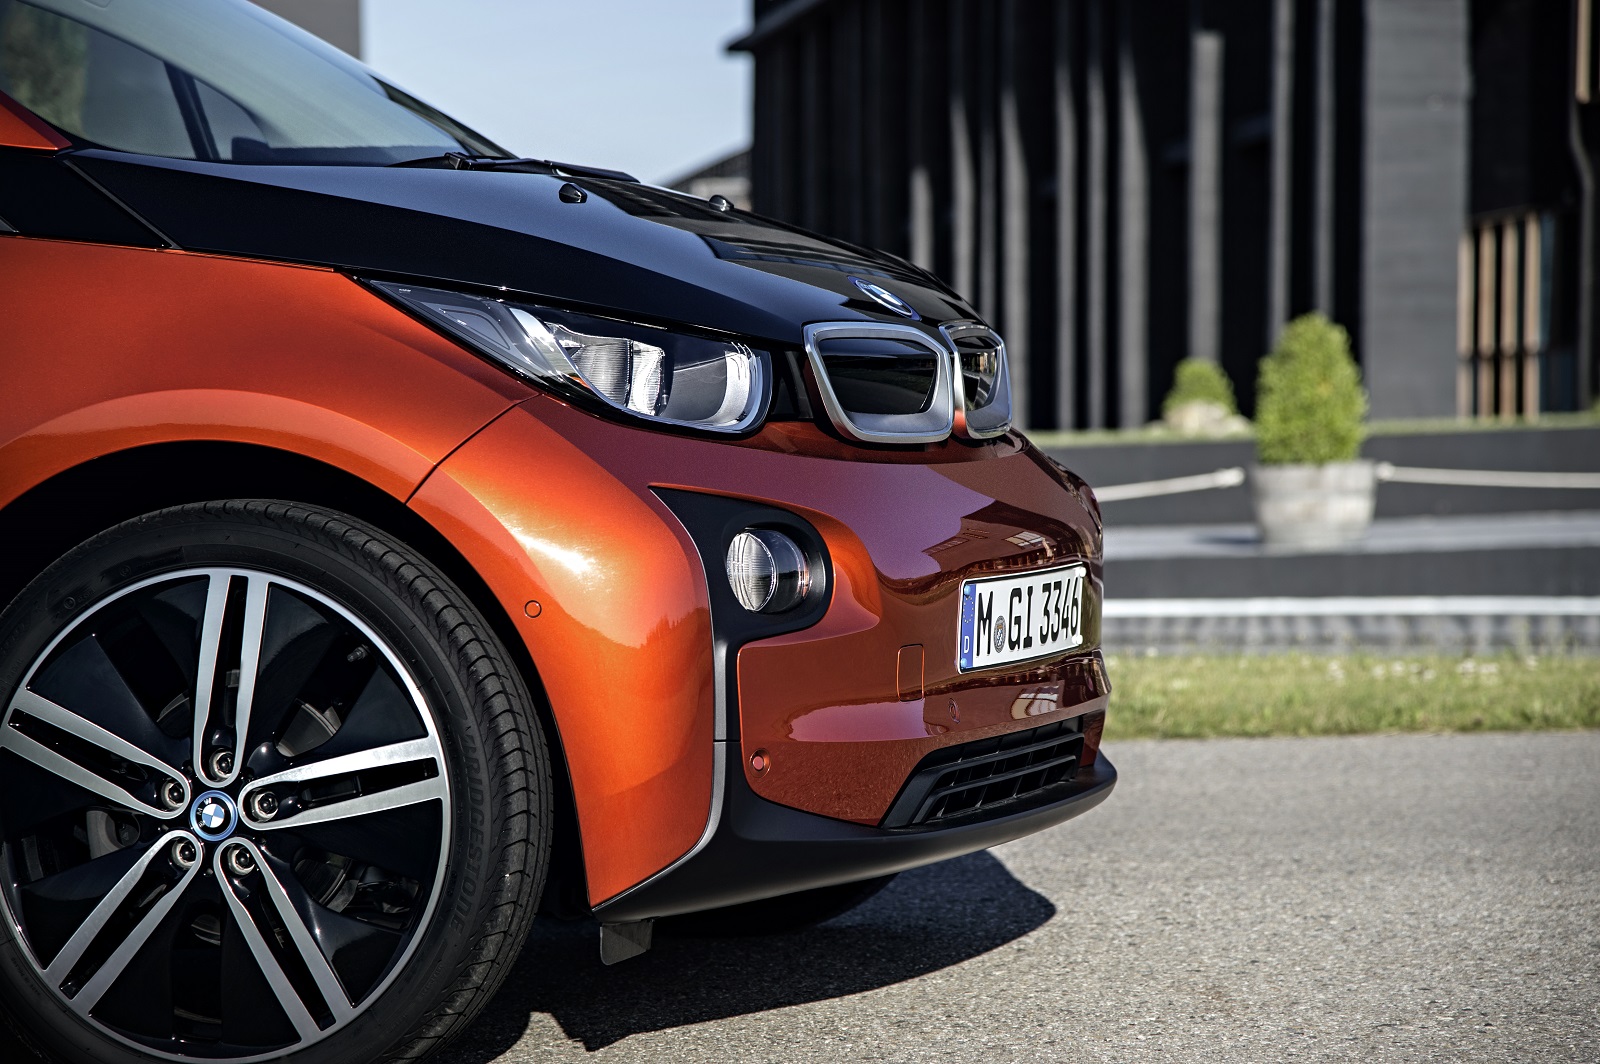 2014 BMW i3 Electric Car Full Details And Images Released